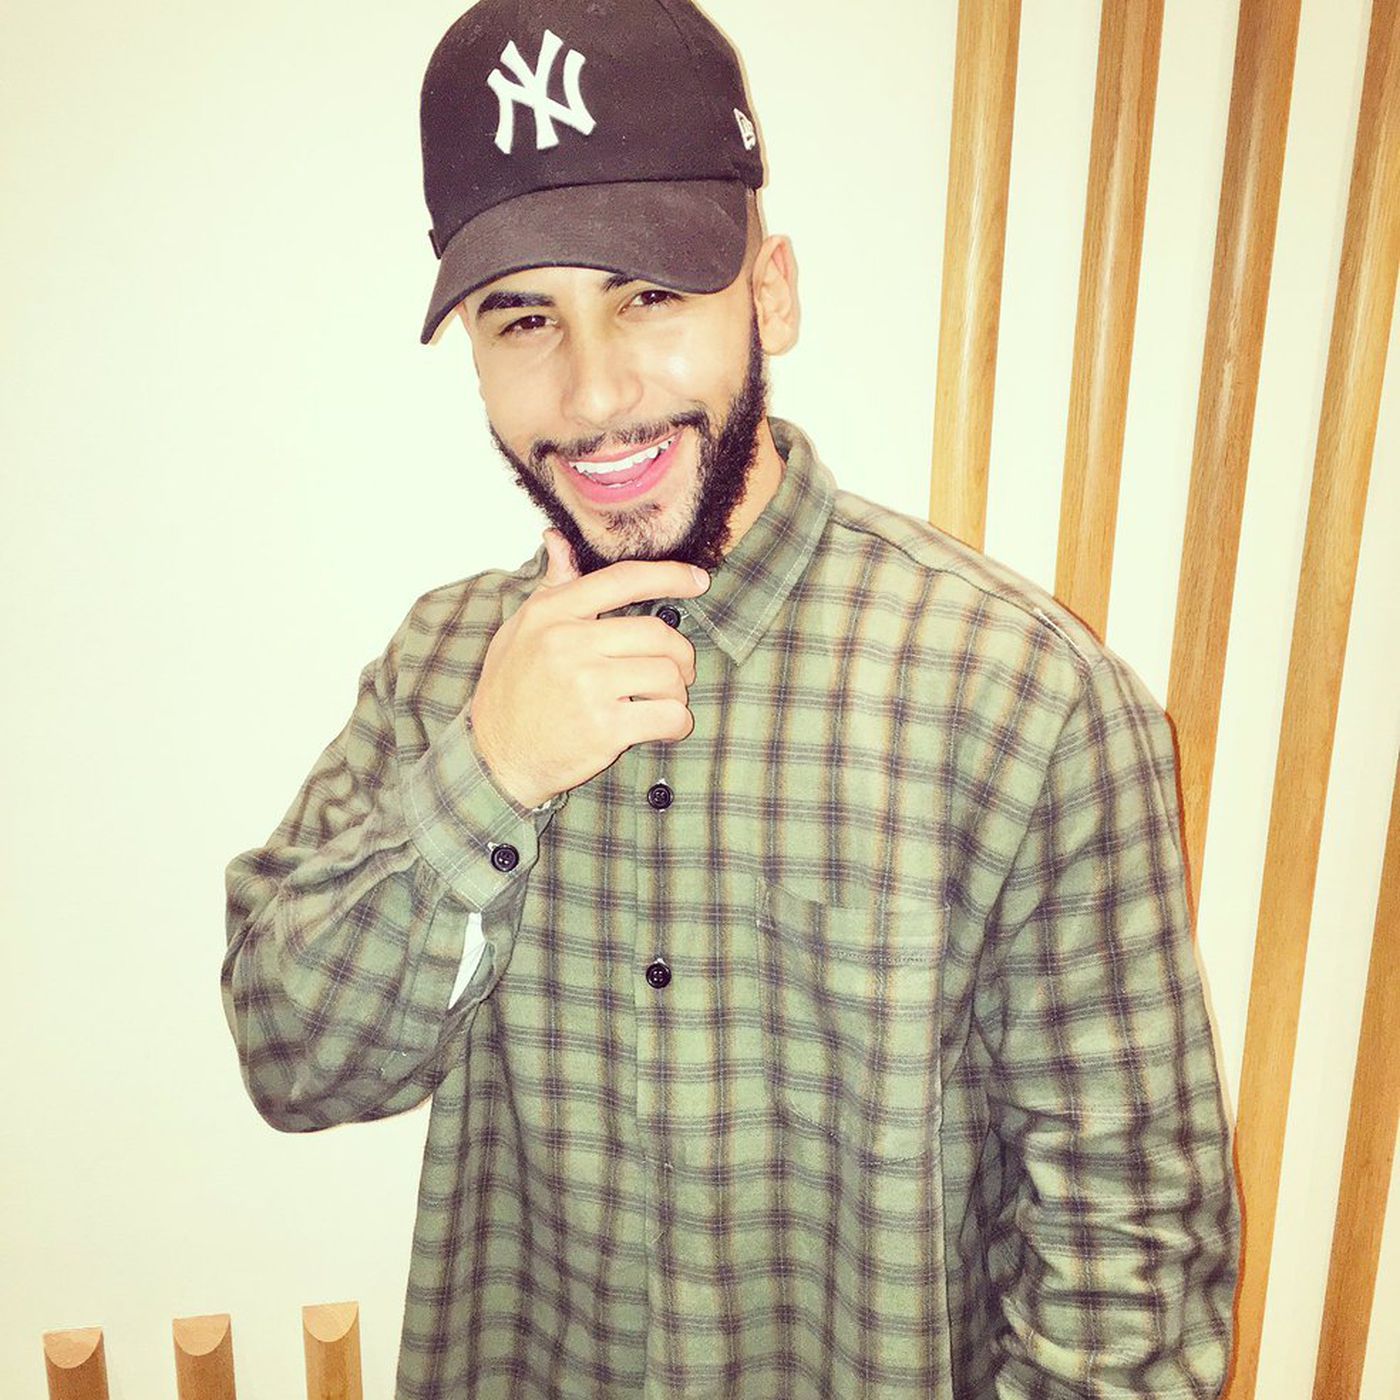 The controversy over YouTube star Adam Saleh's ejection from a